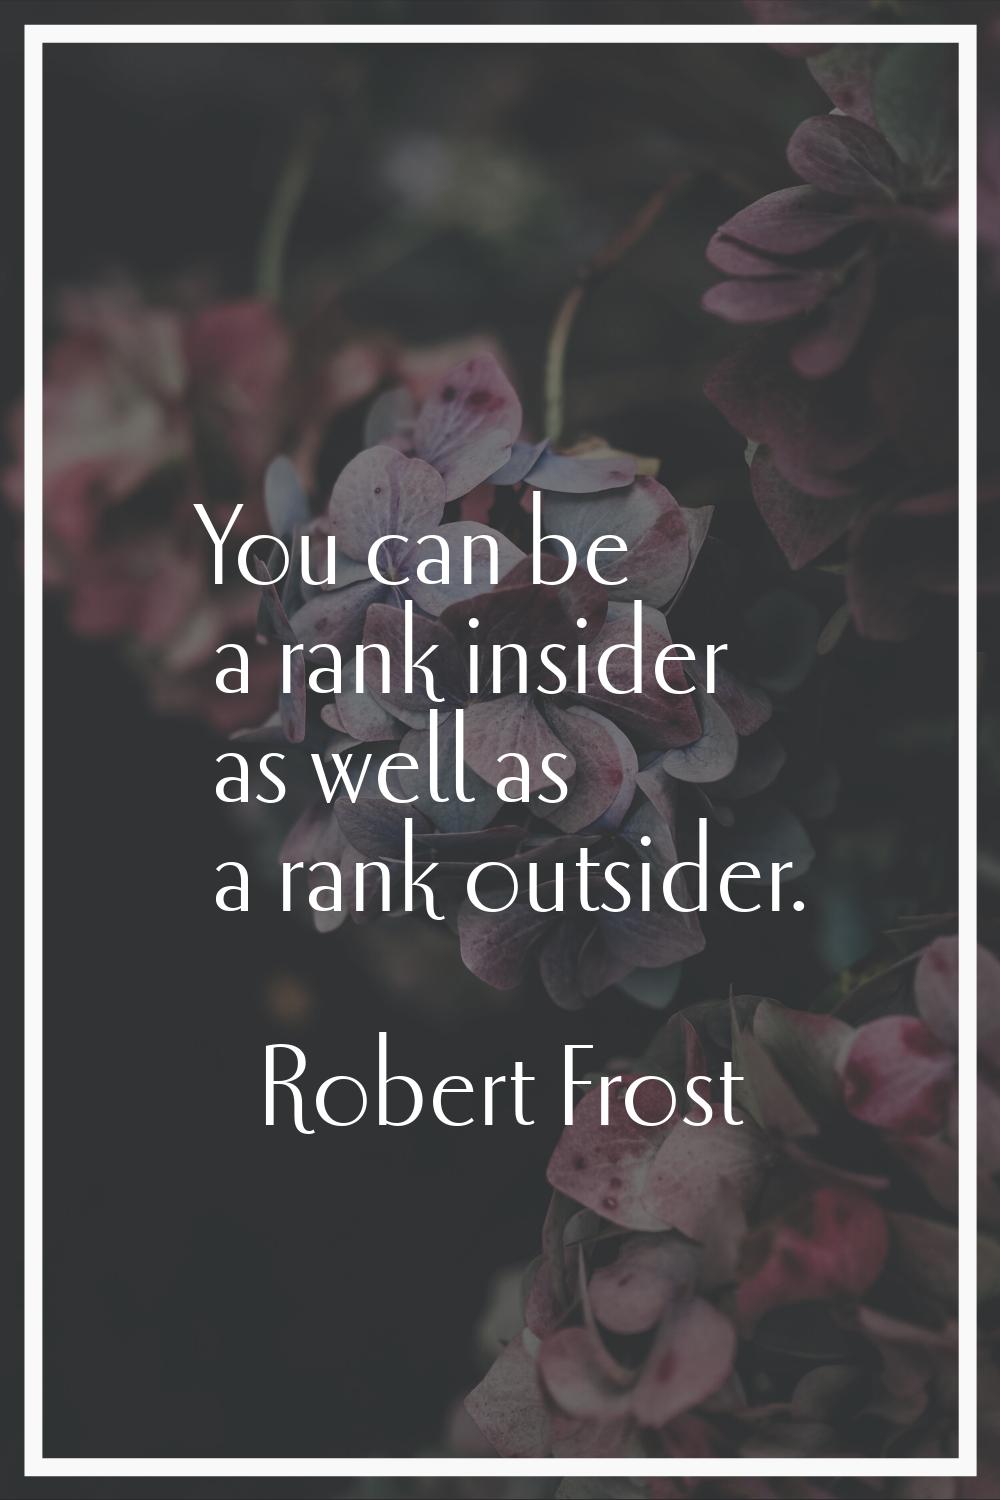 You can be a rank insider as well as a rank outsider.